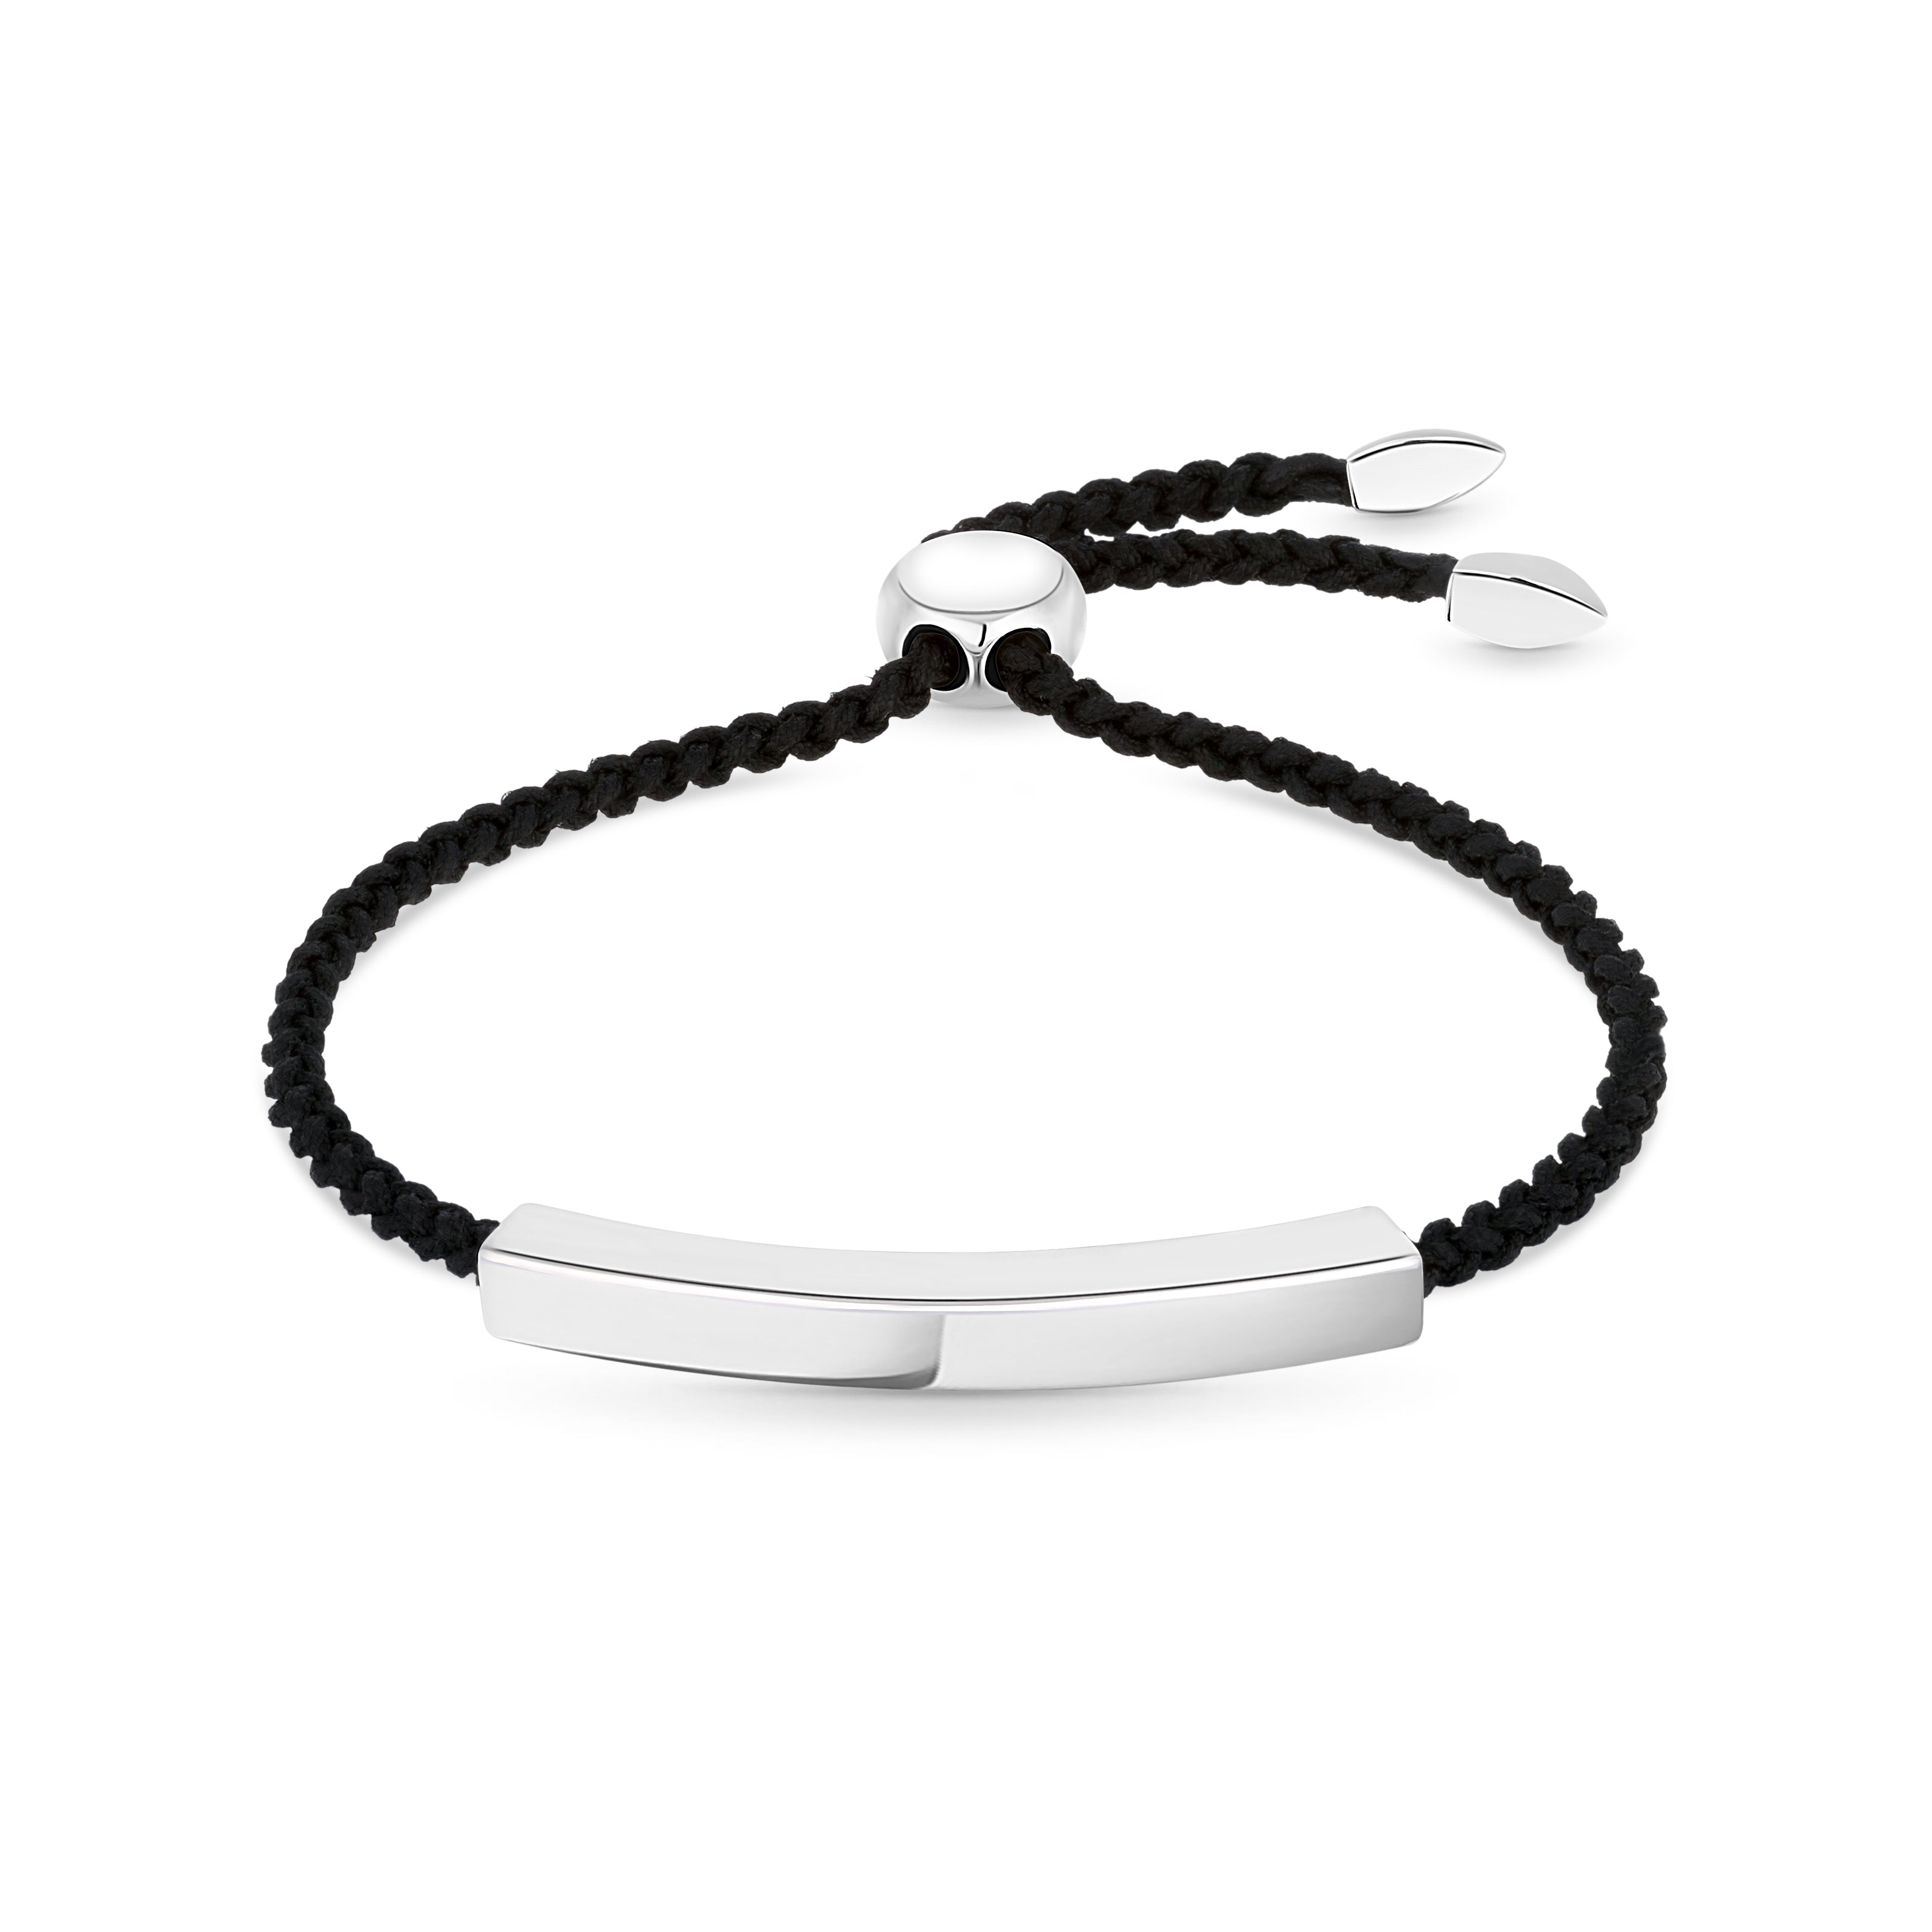 Sula Bracelet in Rhodium plating with black cord